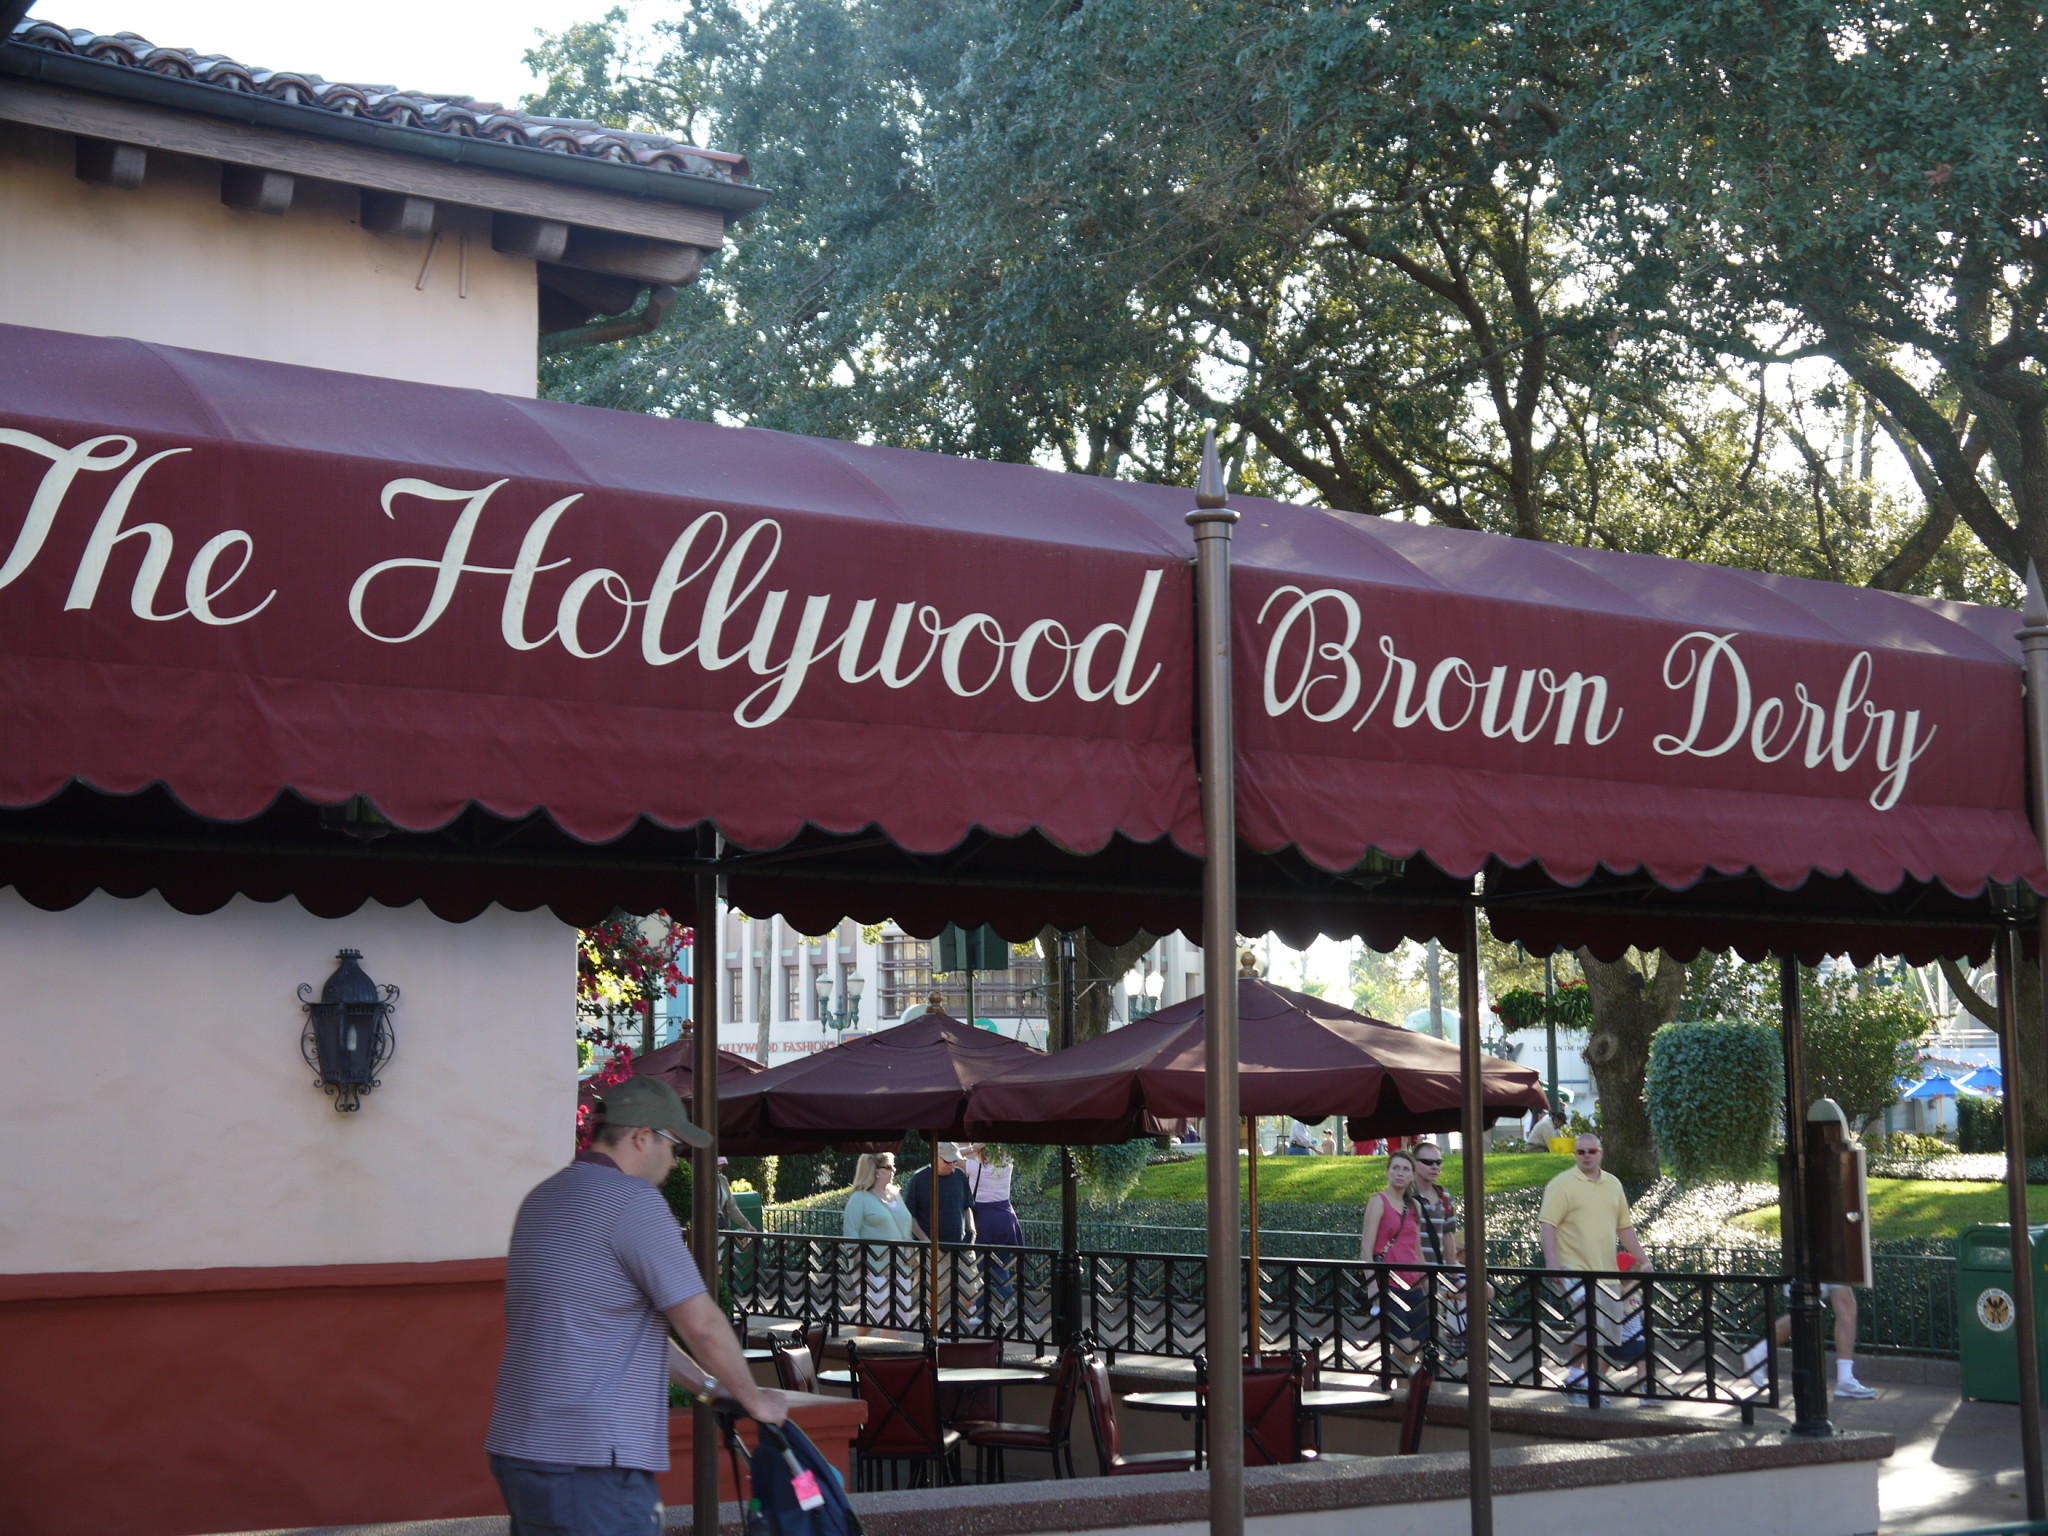 Is The Hollywood Brown Derby Testing A New Lunch Menu?